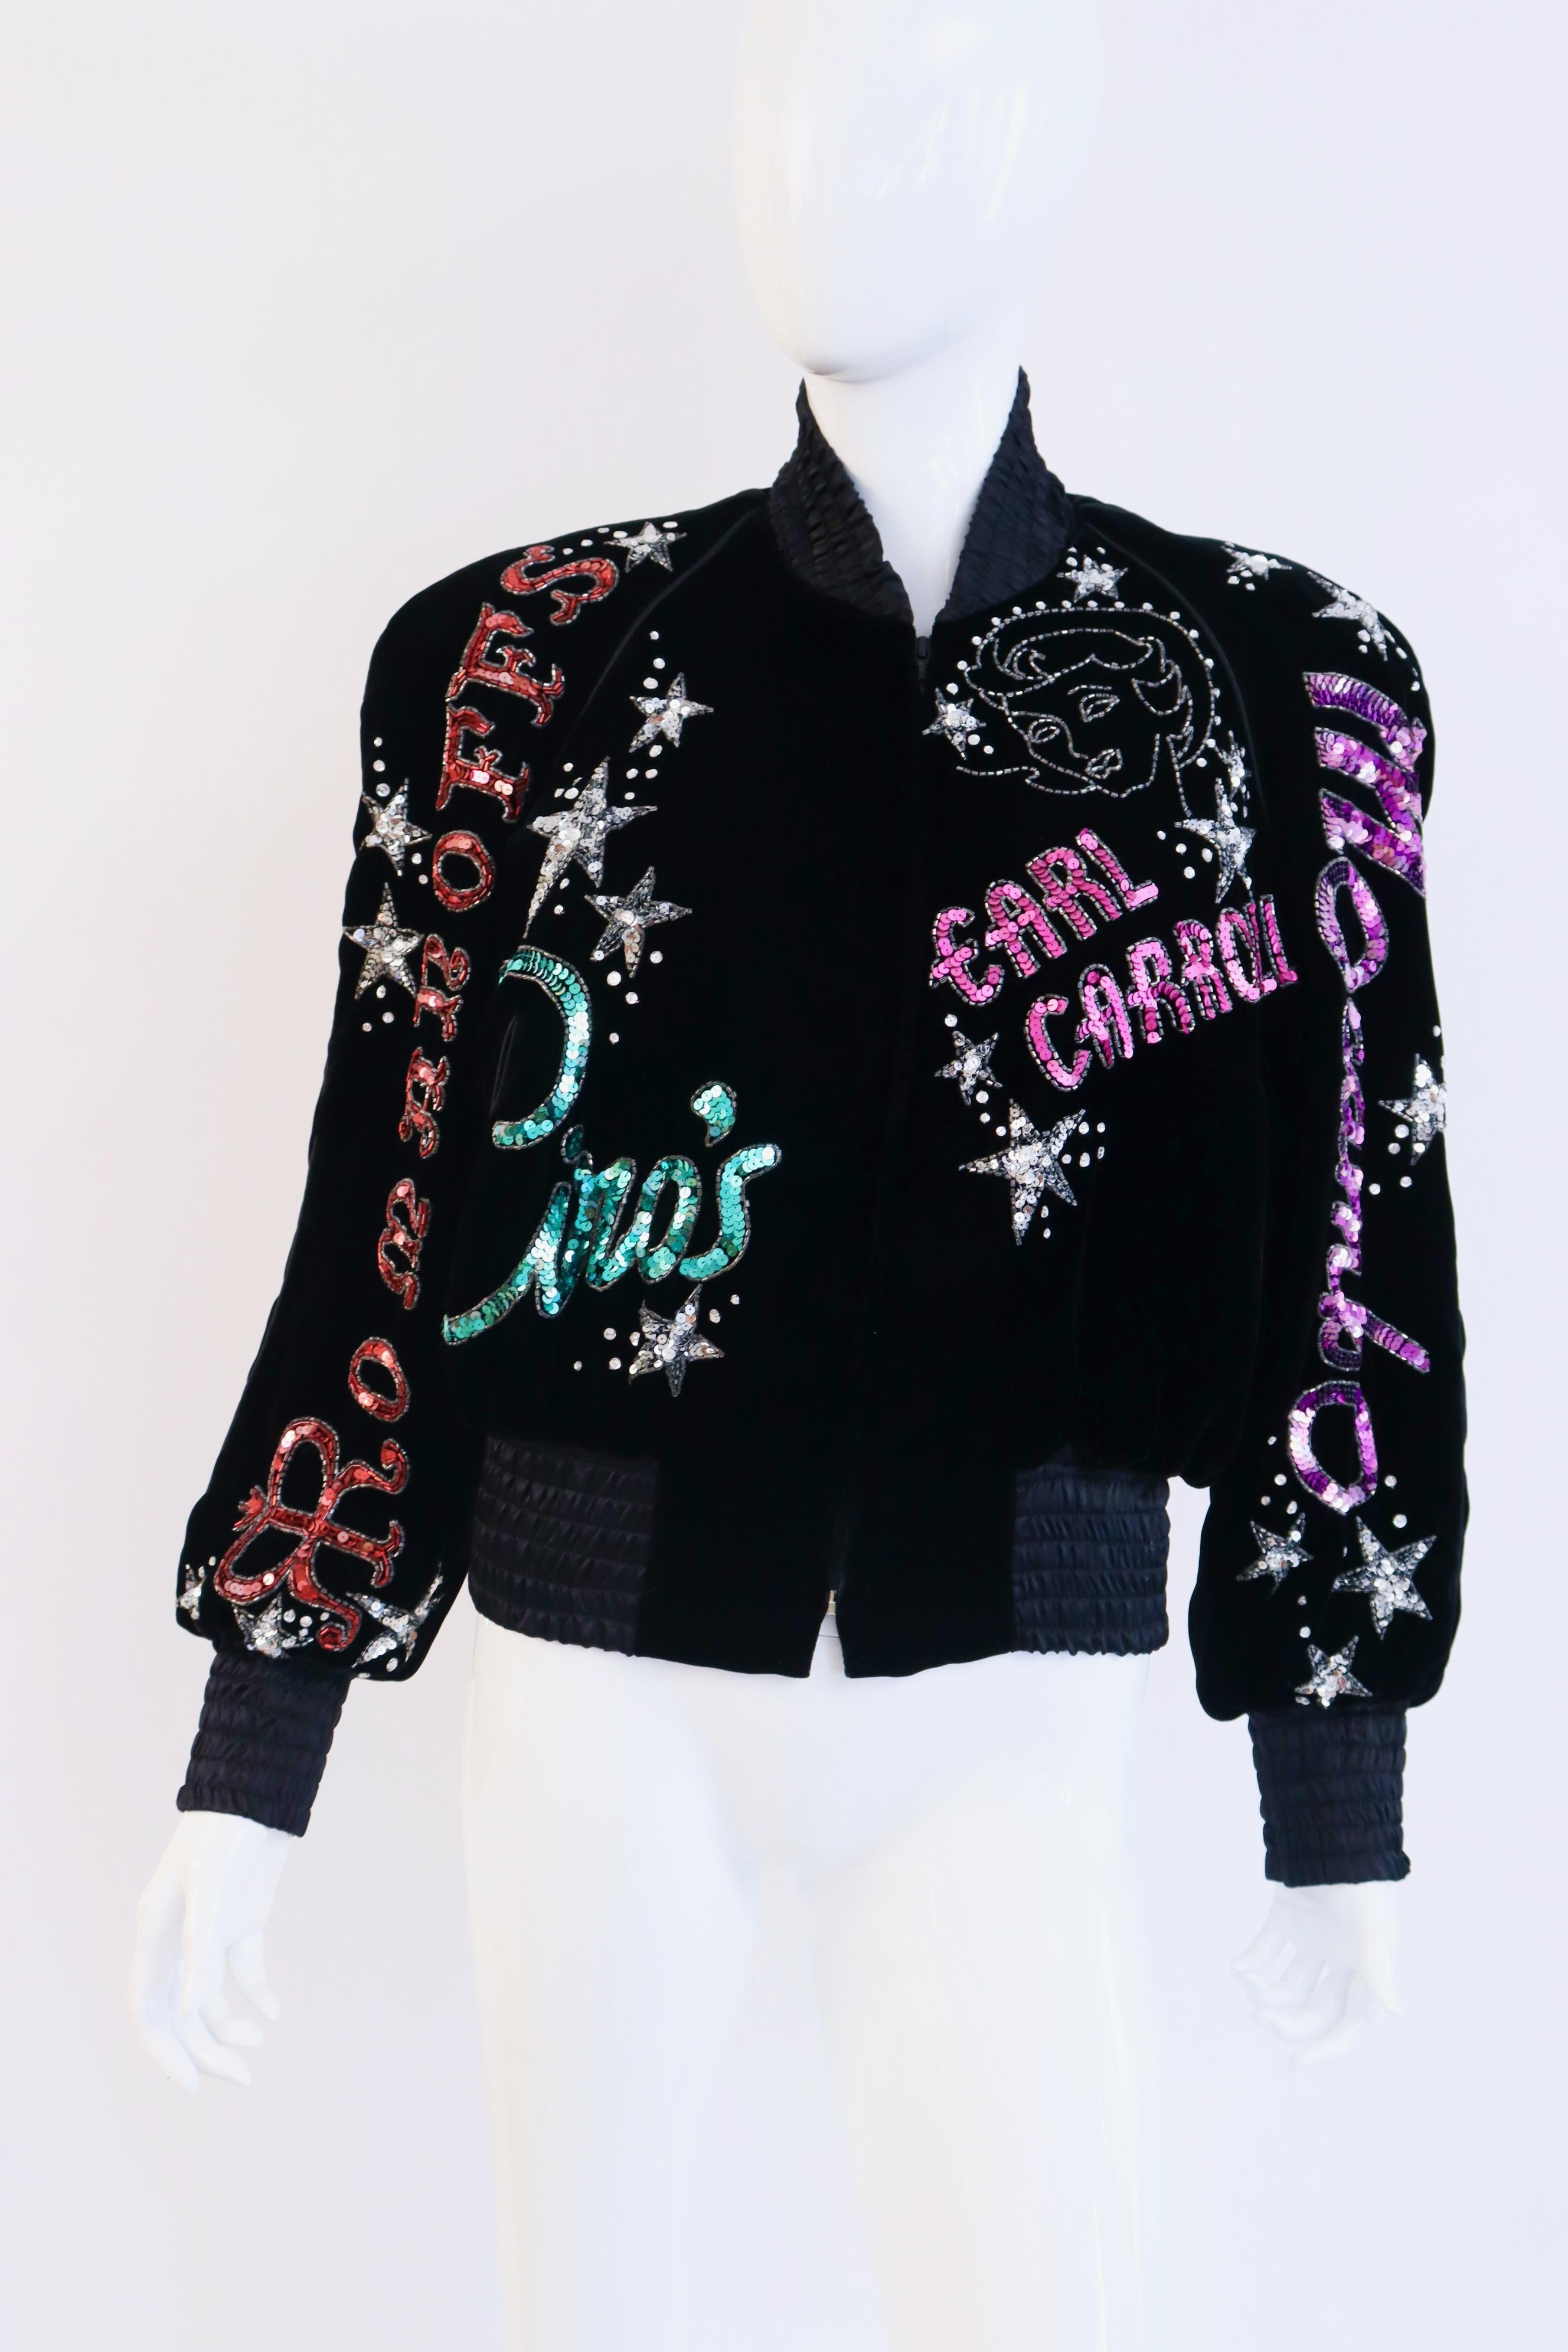 Rare Vintage 80's BOB MACKIE Old Hollywood Hot Spot Themed Sequin Velvet Jacket!  This bomber jacket is incredible and very hard to part with.  The beading and sequin work is exquisite and it is in excellent condition.  Quilted satin lining. 